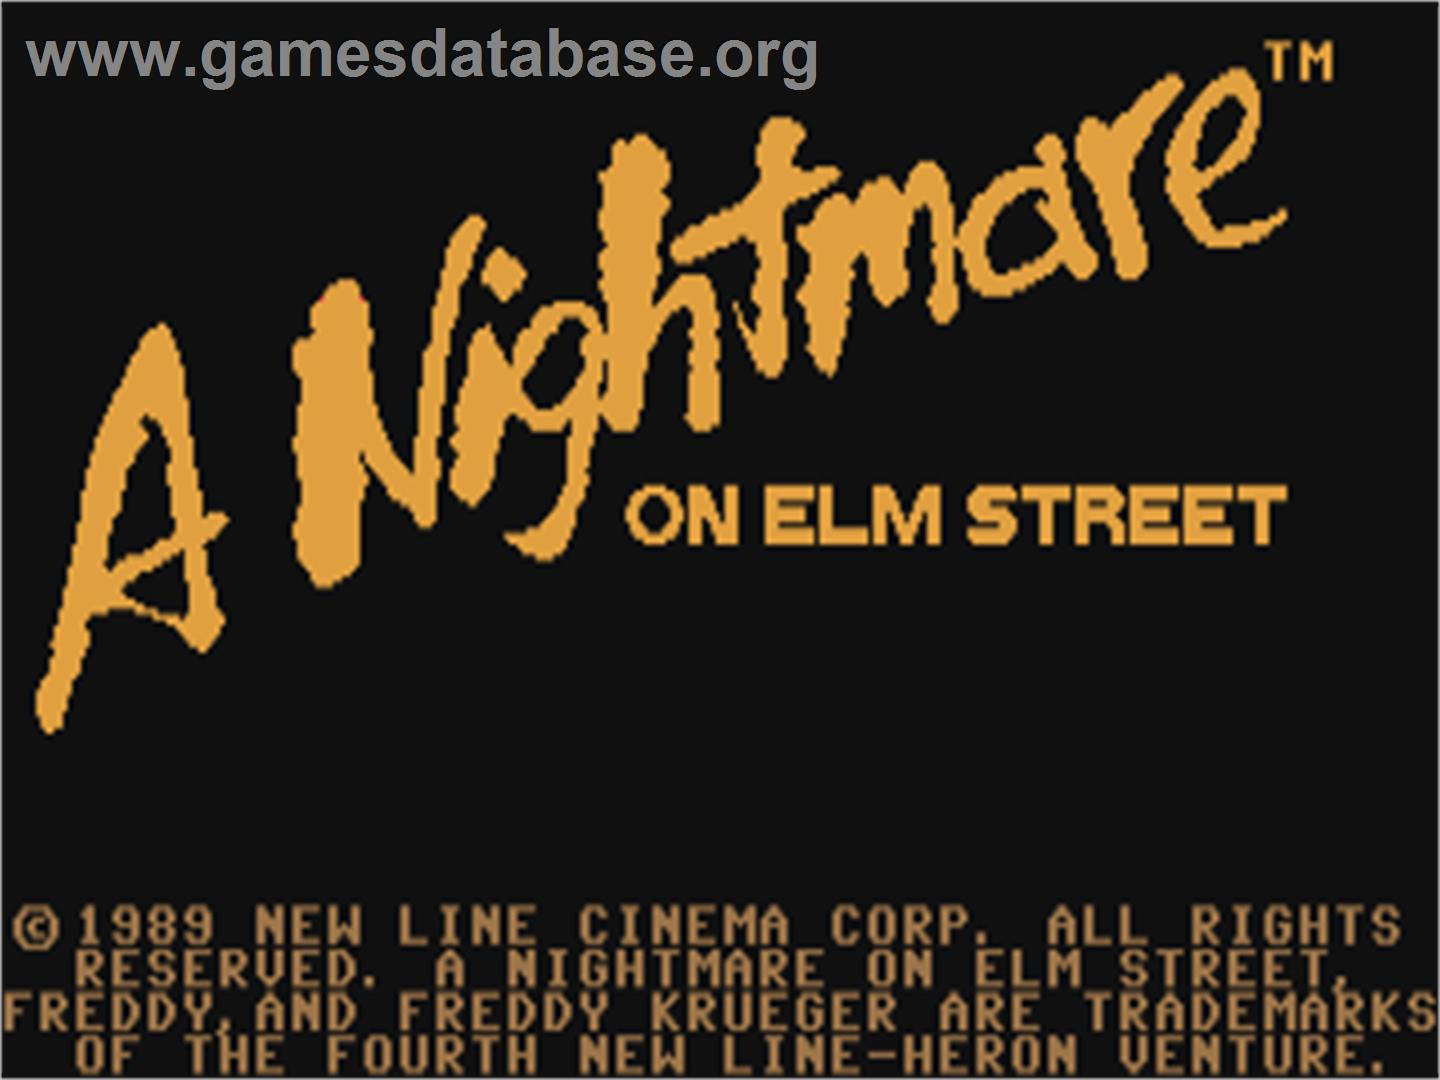 A Nightmare on Elm Street - Commodore 64 - Artwork - Title Screen